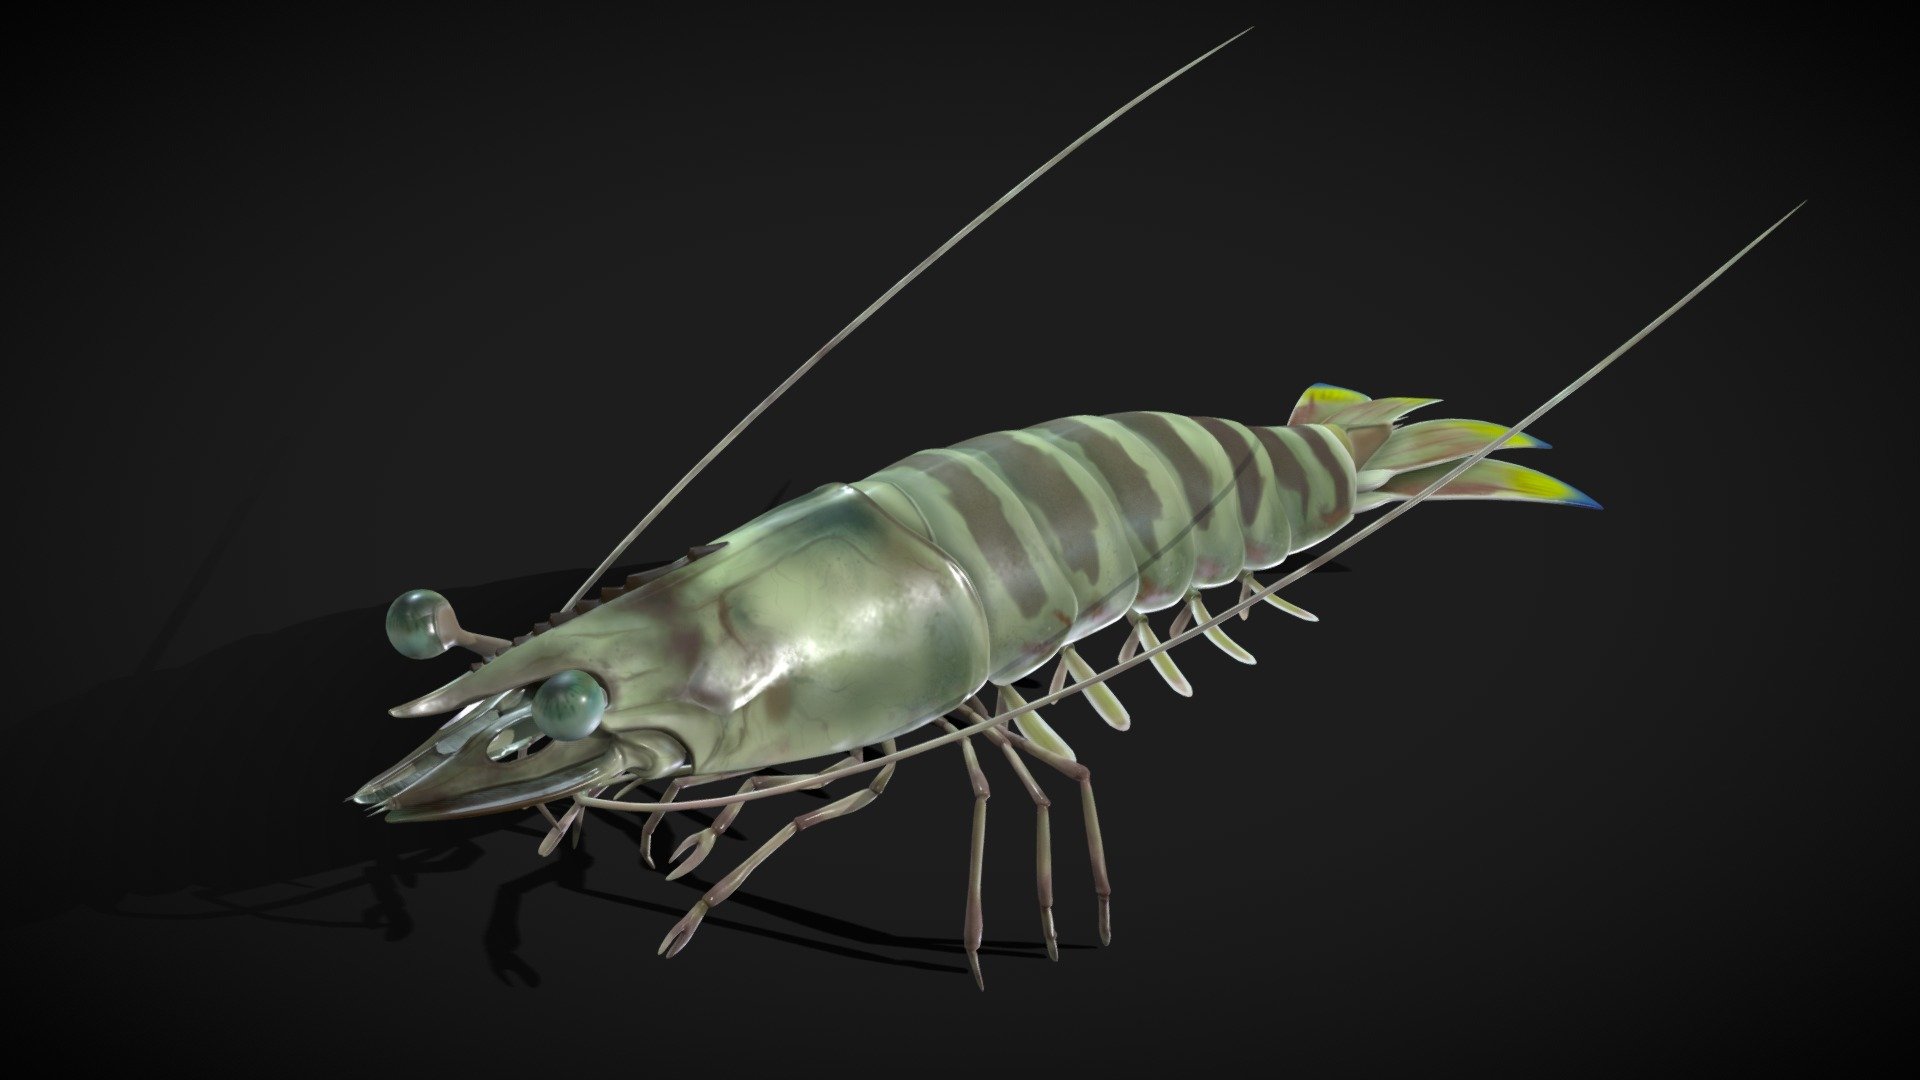 This is the Panaues Kerathurus, the Mediterranean shrimp, made for projection in a holographic screen for a Greek aquatic museum, a collaboration project with the company Comitech S.A 3d model